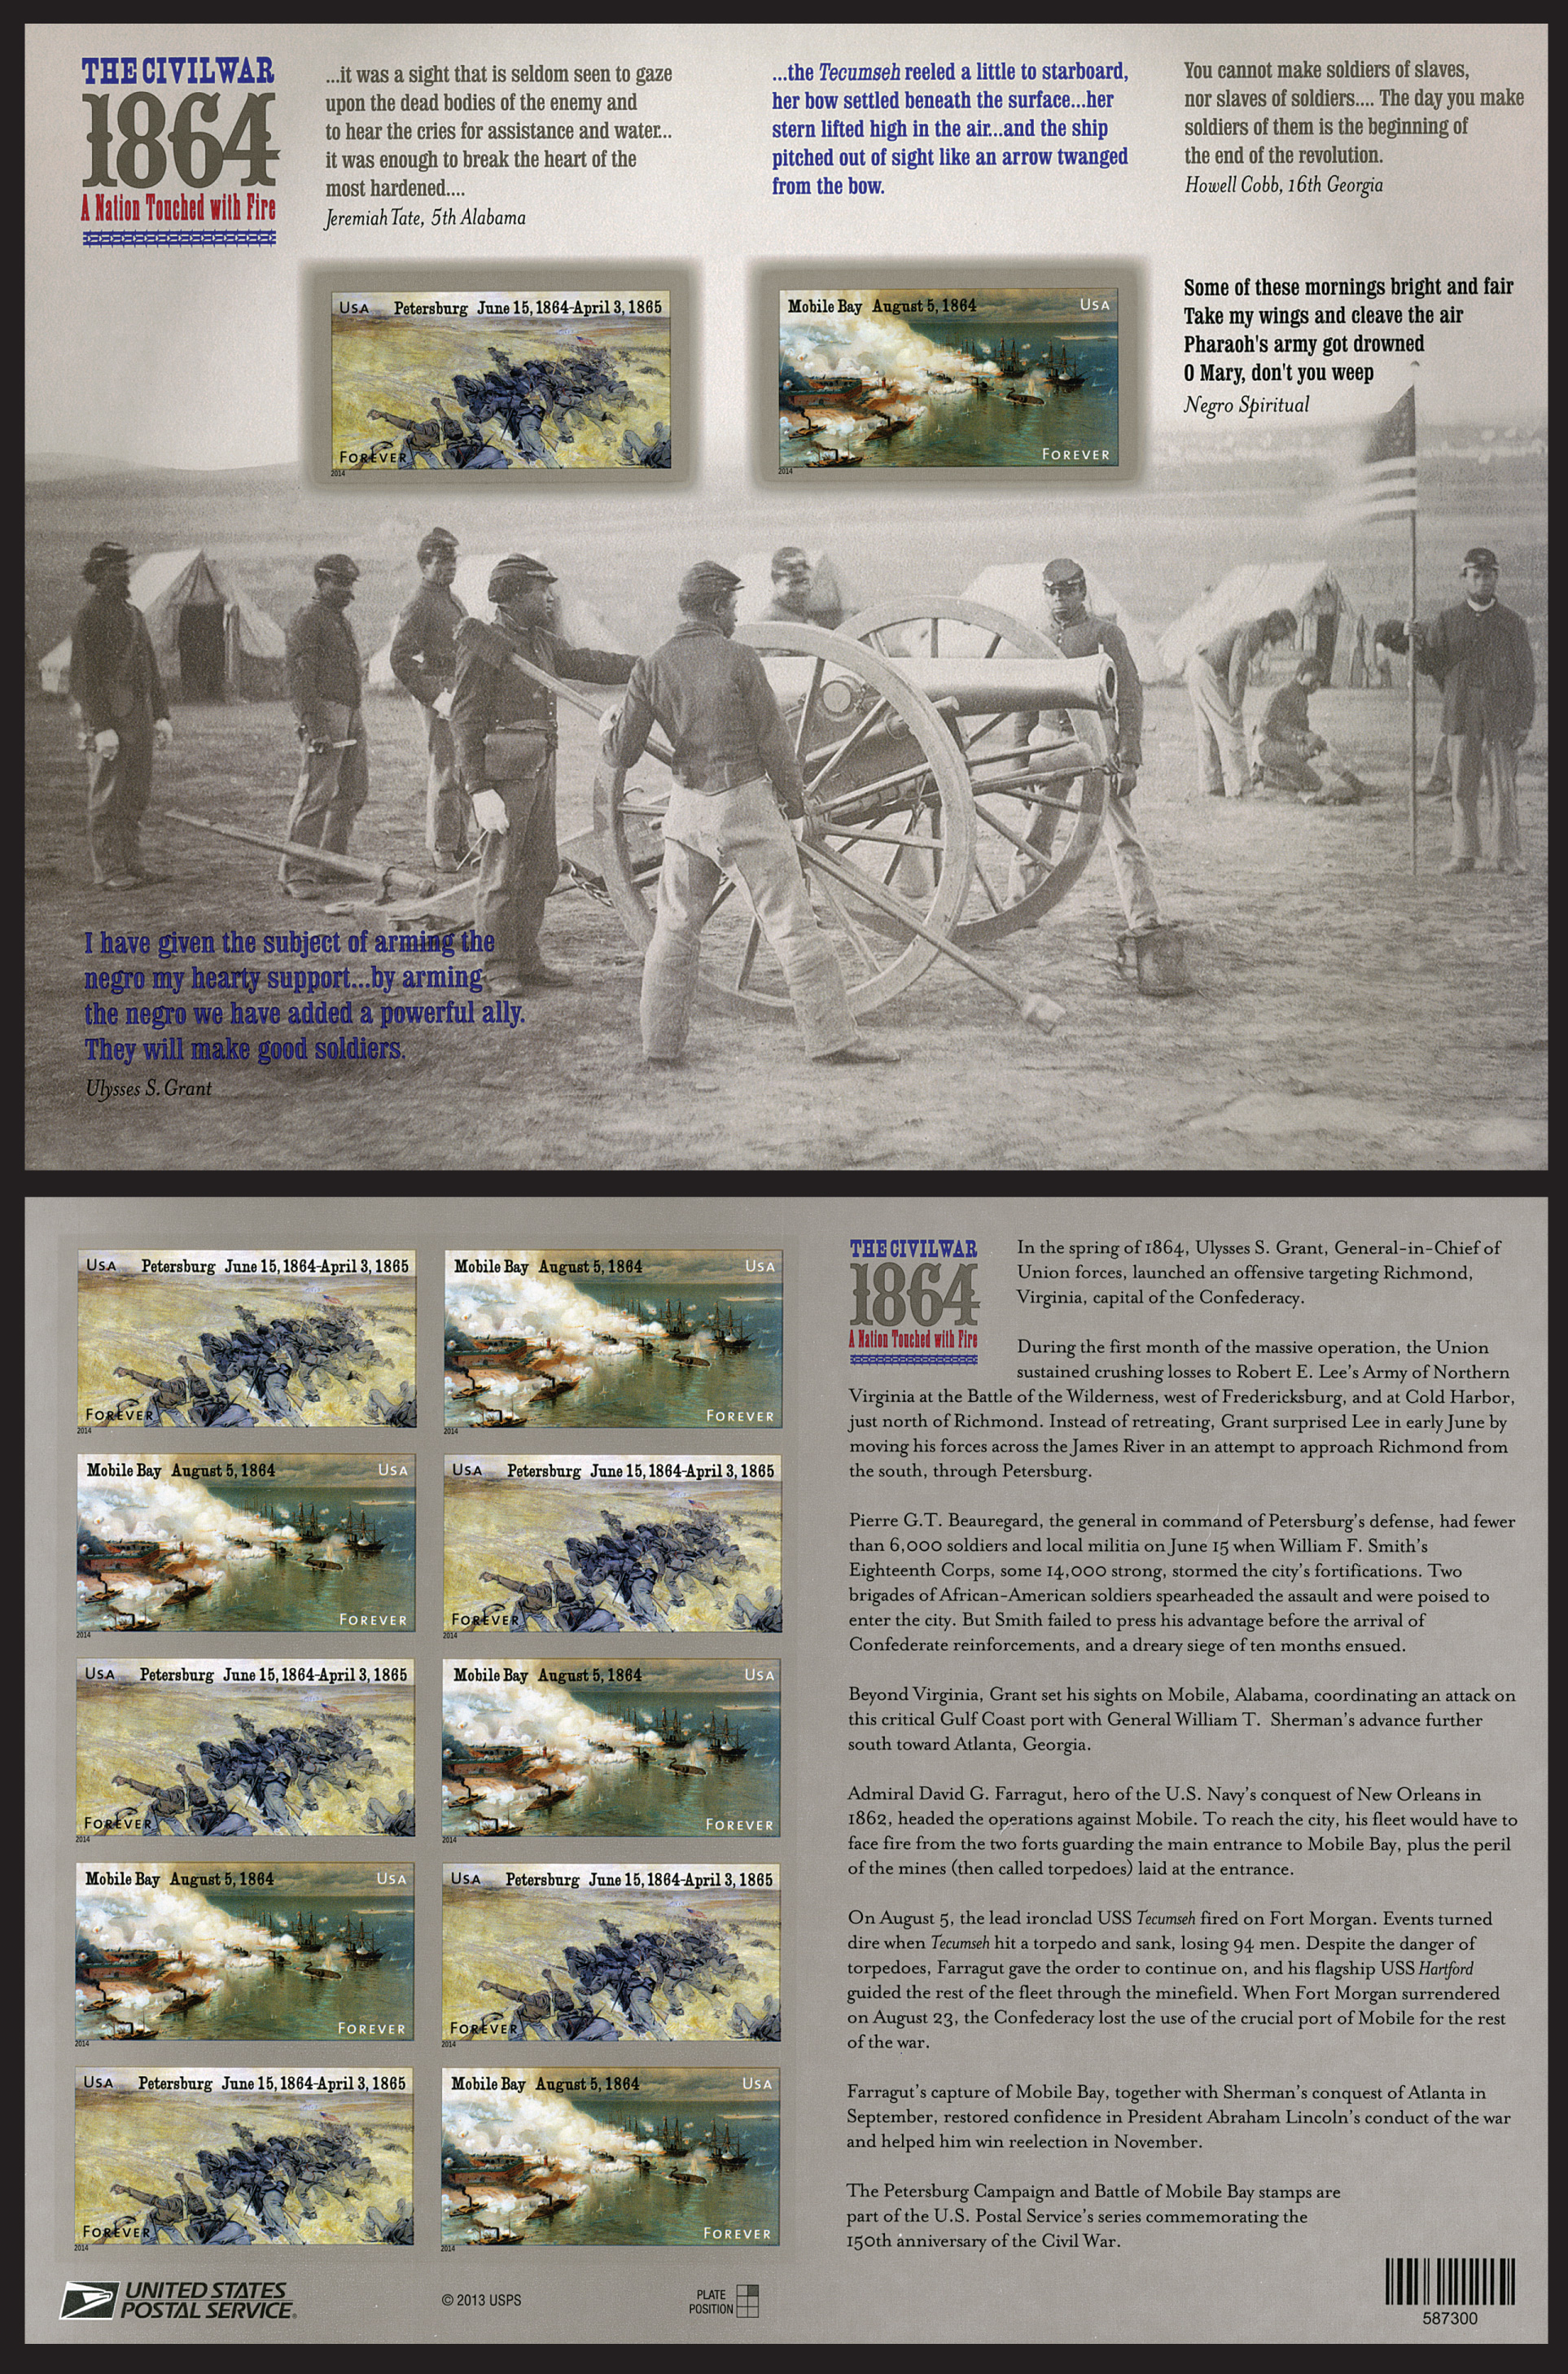 2014 Civil War Sesquicentennial: 1864 Battles of Petersburg and Mobile Bay Imperforate mint stamp sheet. 